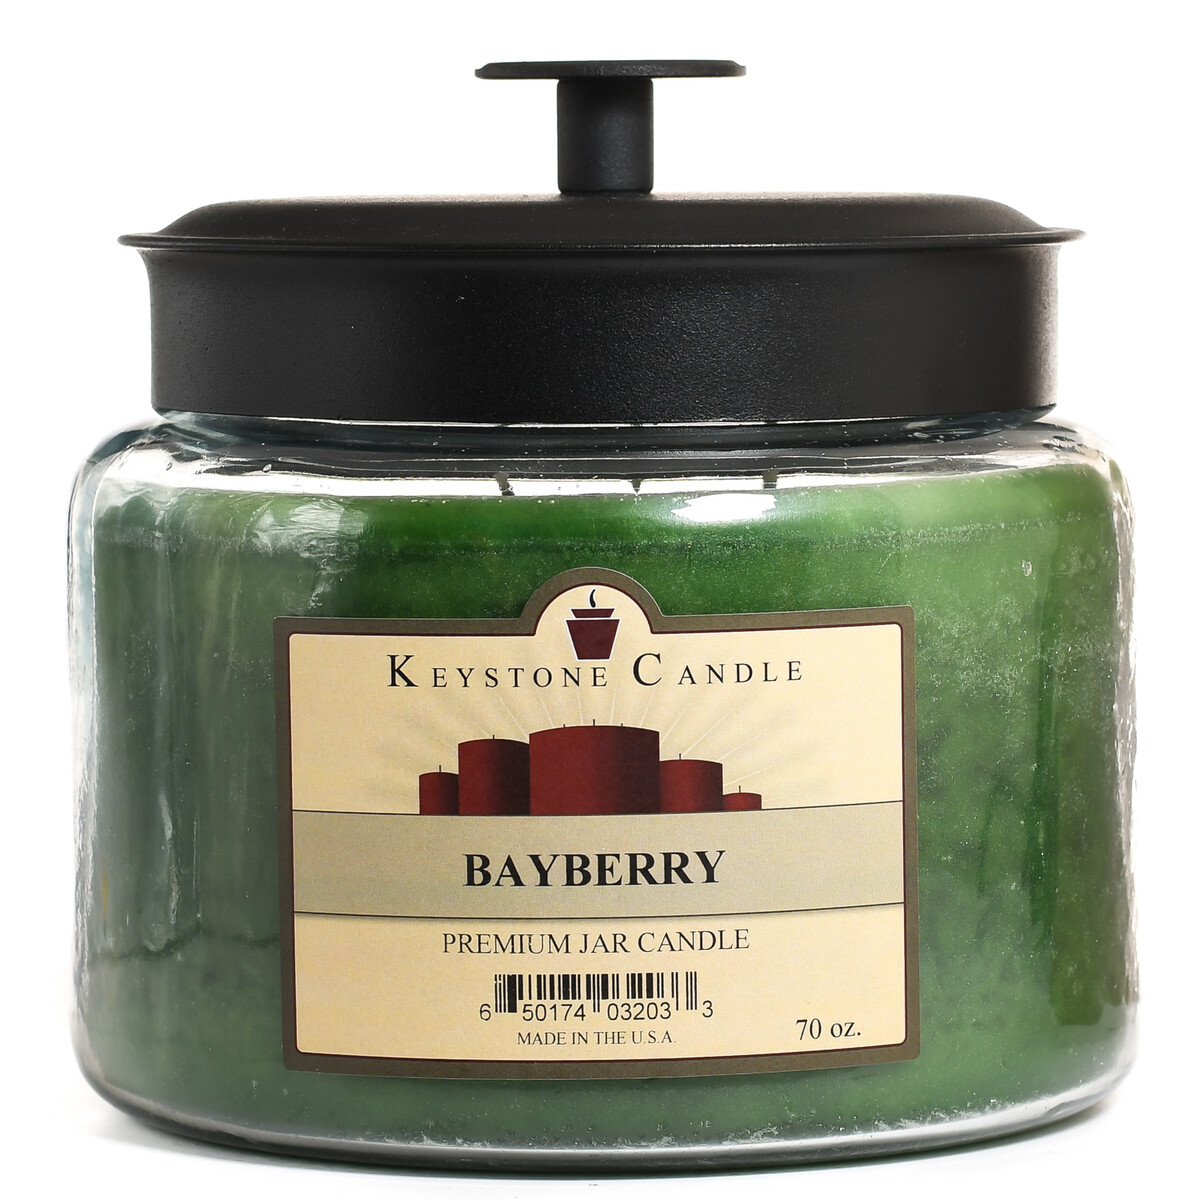 When To Burn Bayberry Candles